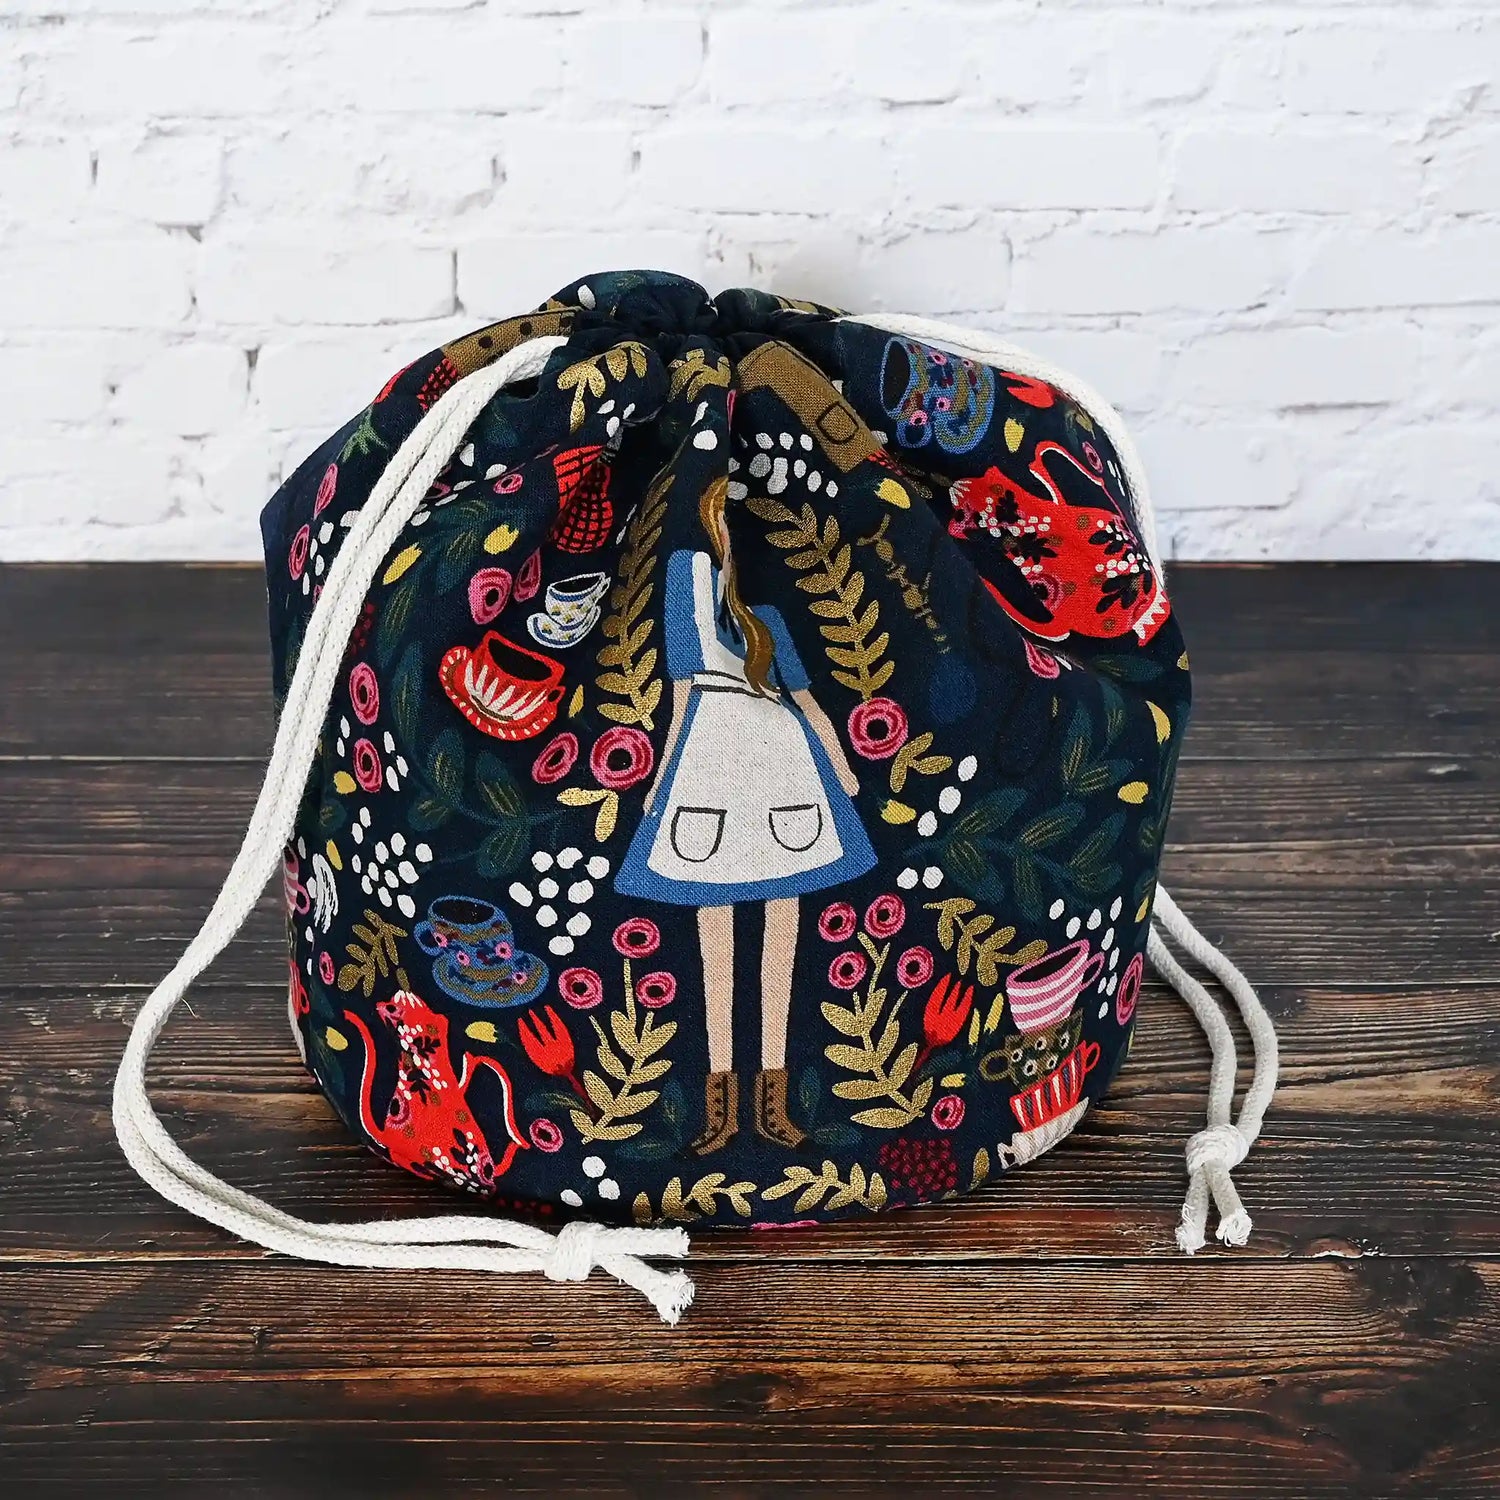 Gorgeous navy bucket bag made from canvas with a beautiful Alice in Wonderland pattern.  It has lots of pockets and is structured to stand alone.  Made in Canada by Yellow Petal Handmade.